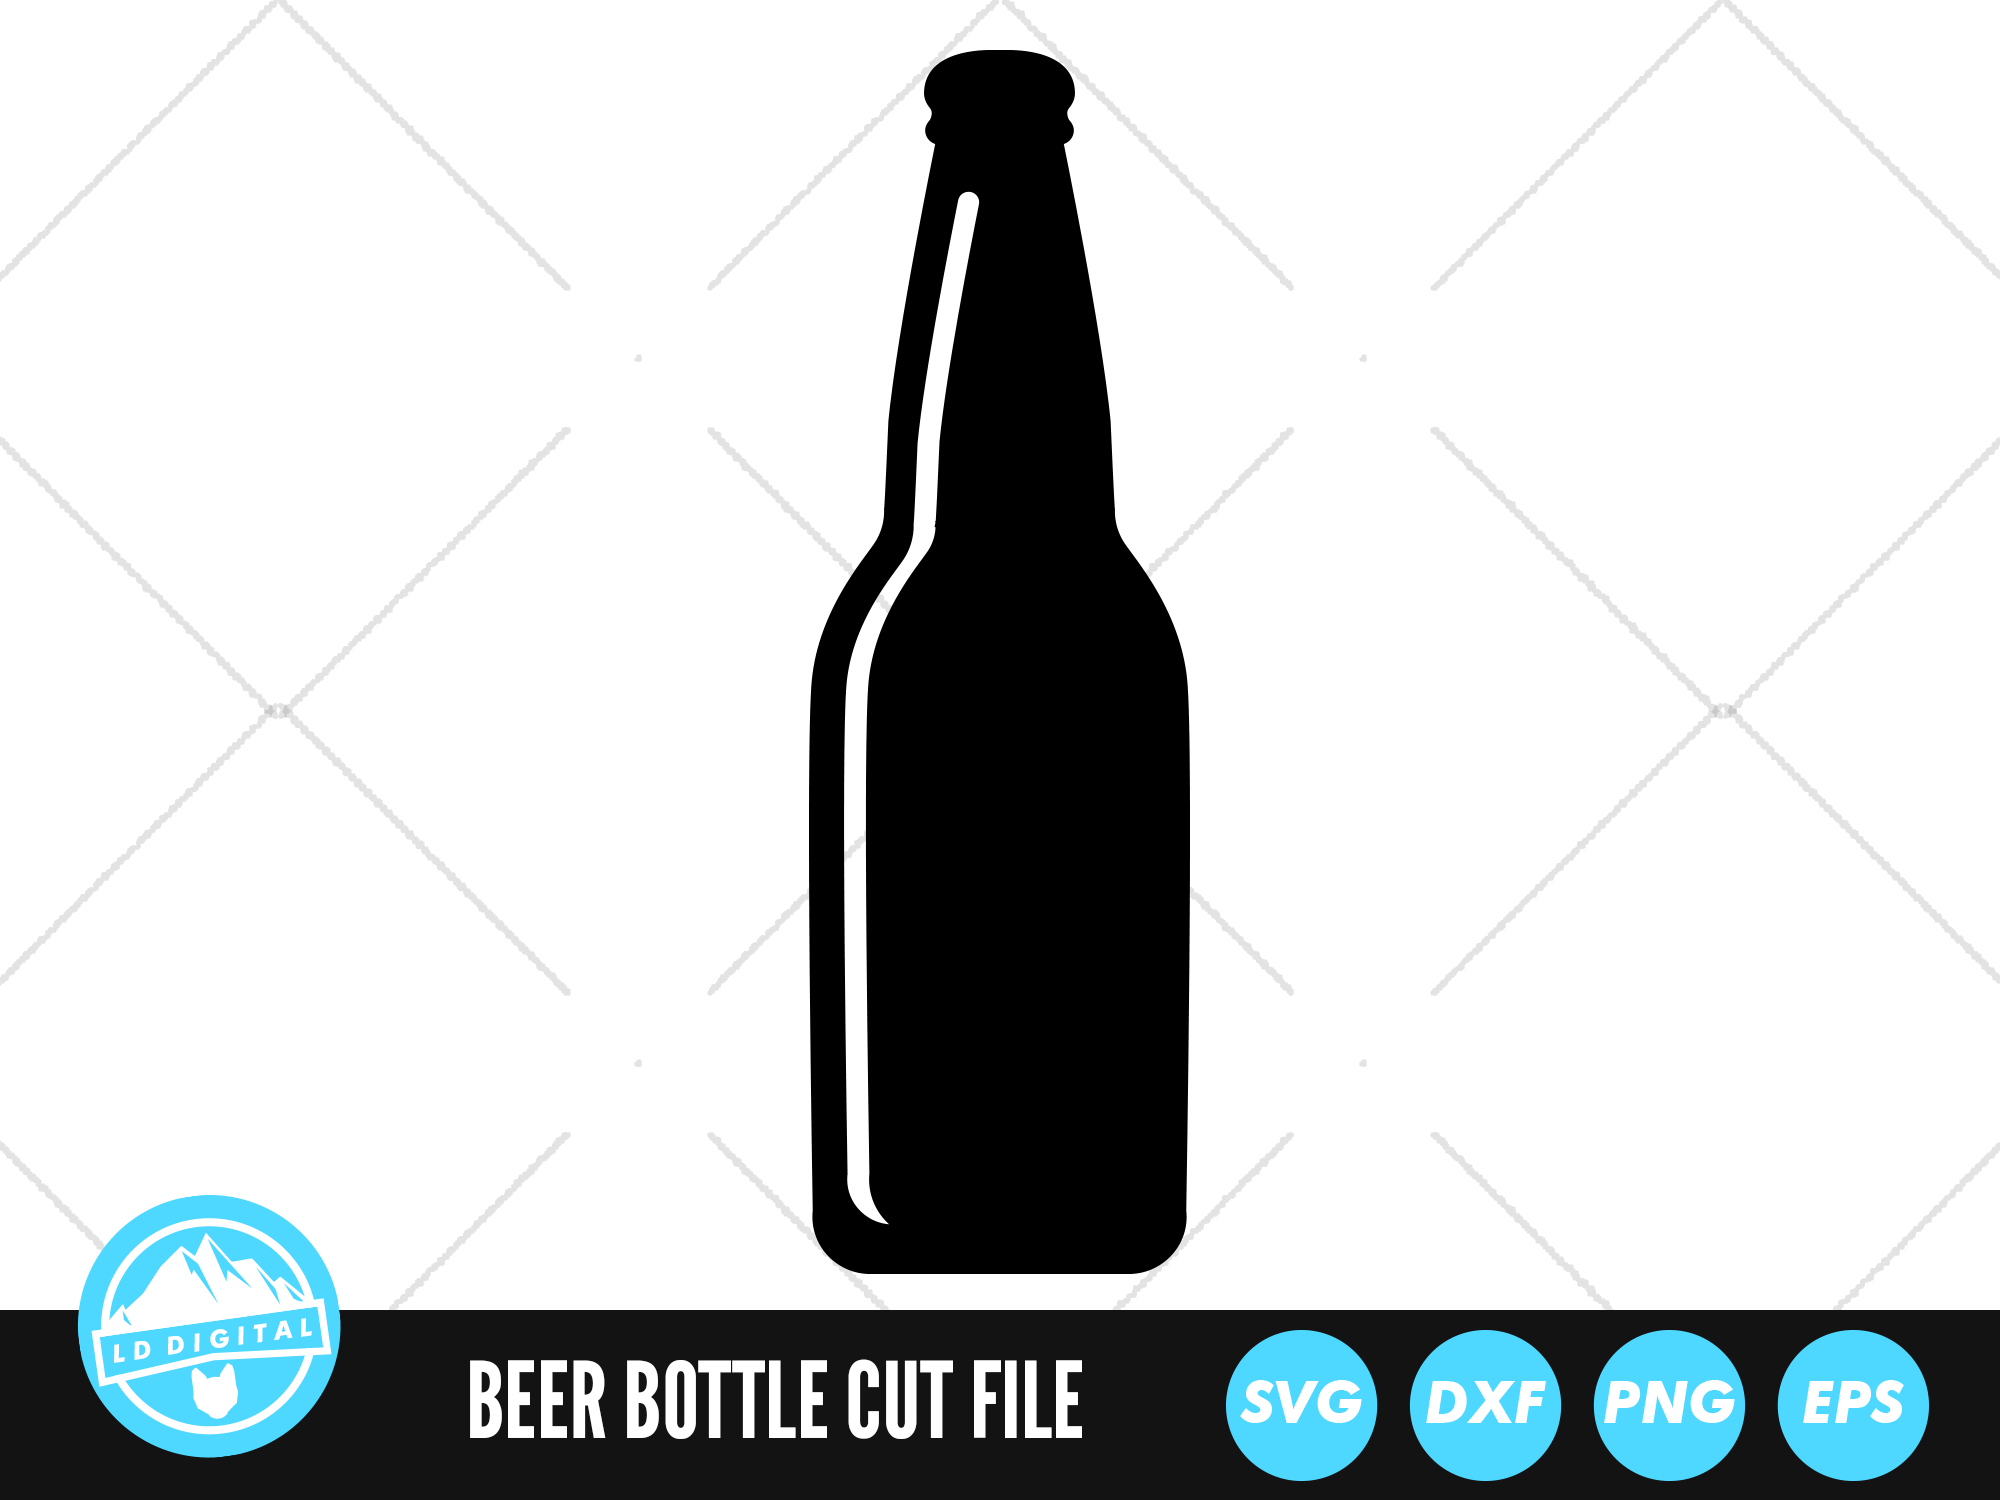 Download Craft Supplies Tools Kits How To Beer Bottle Digital Clipart Files For Design Beer Mug Svg Dxf Printing Png Cutting Or More Instant Files Included Svg Beer Svg